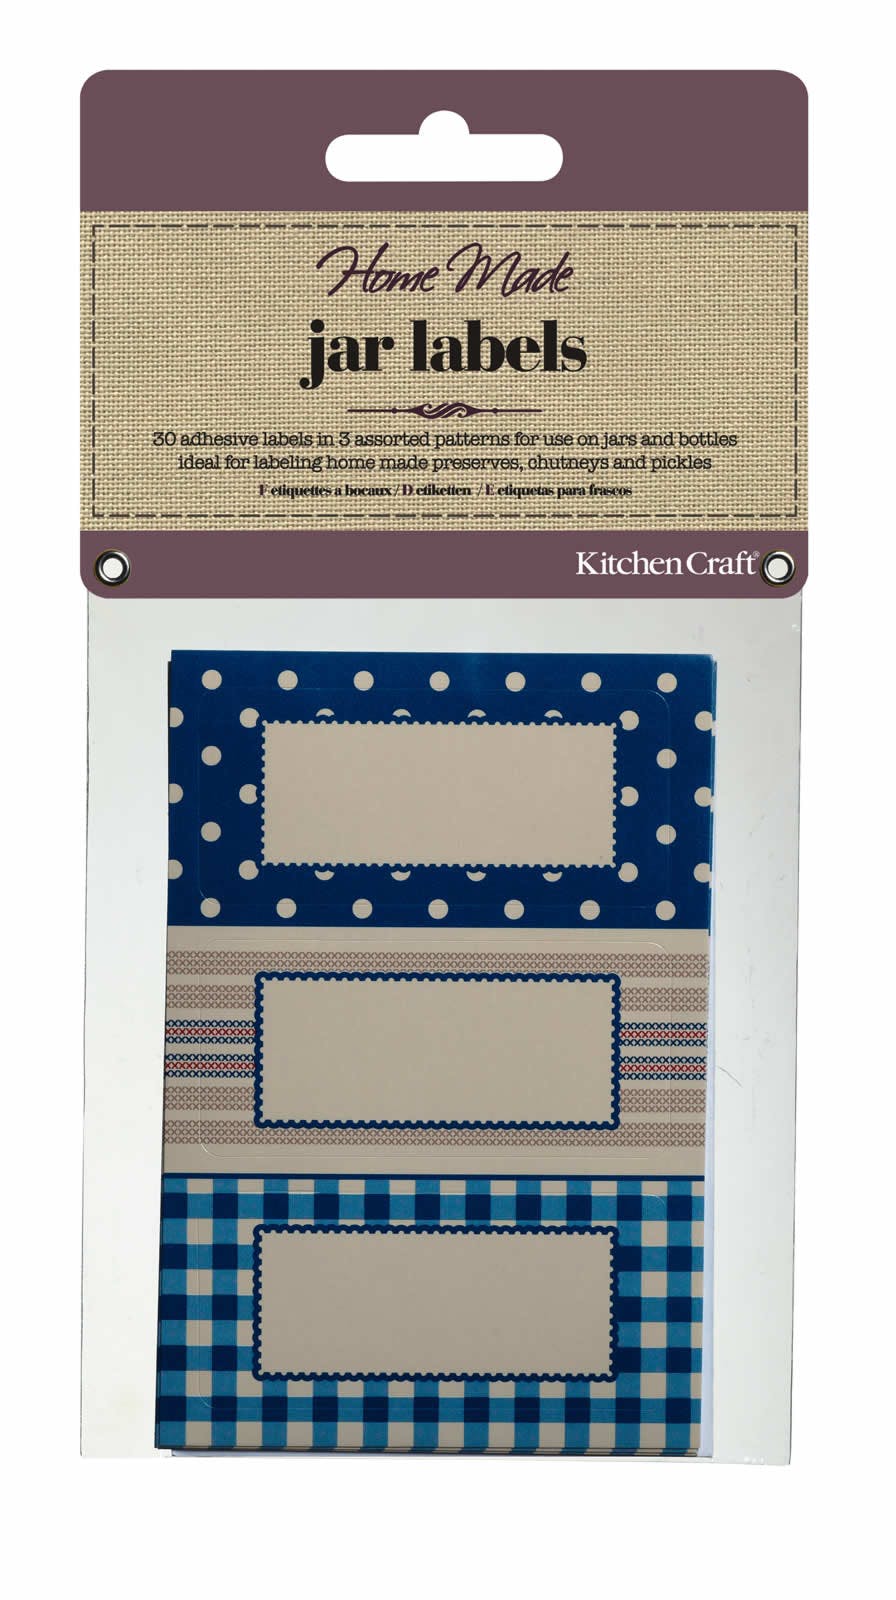 Home Made Pack of 30 Jam Jar Labels - Stitched Stripes - The Cooks Cupboard Ltd